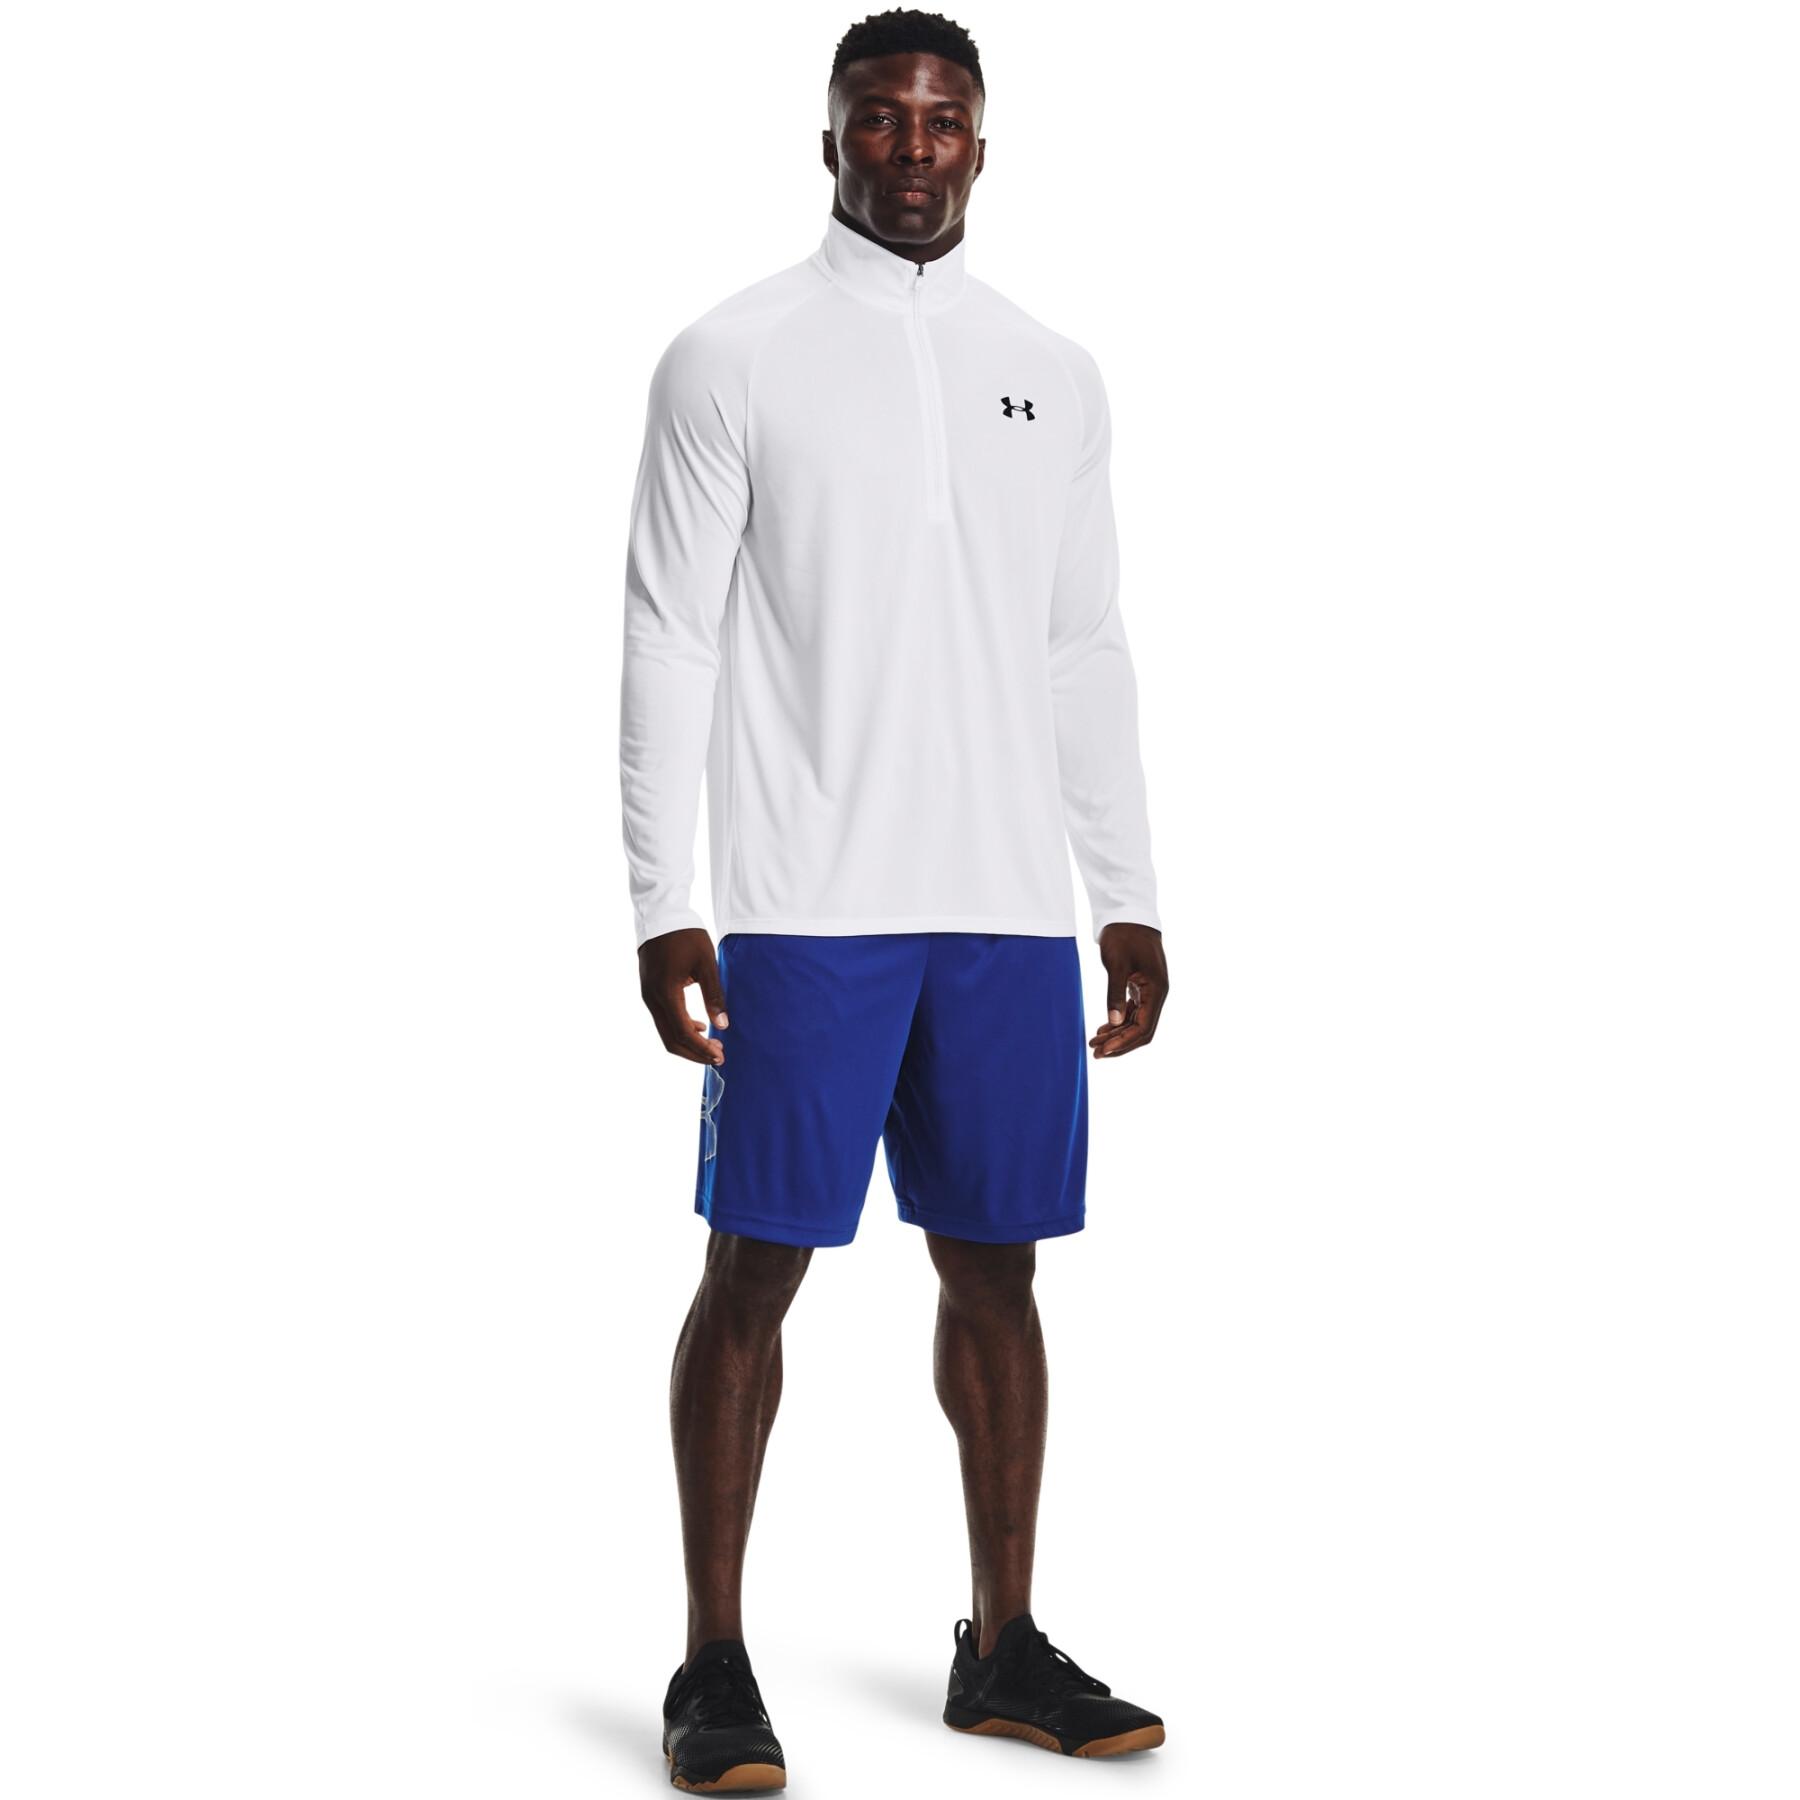 Shorts Under Armour Tech™ Graphic